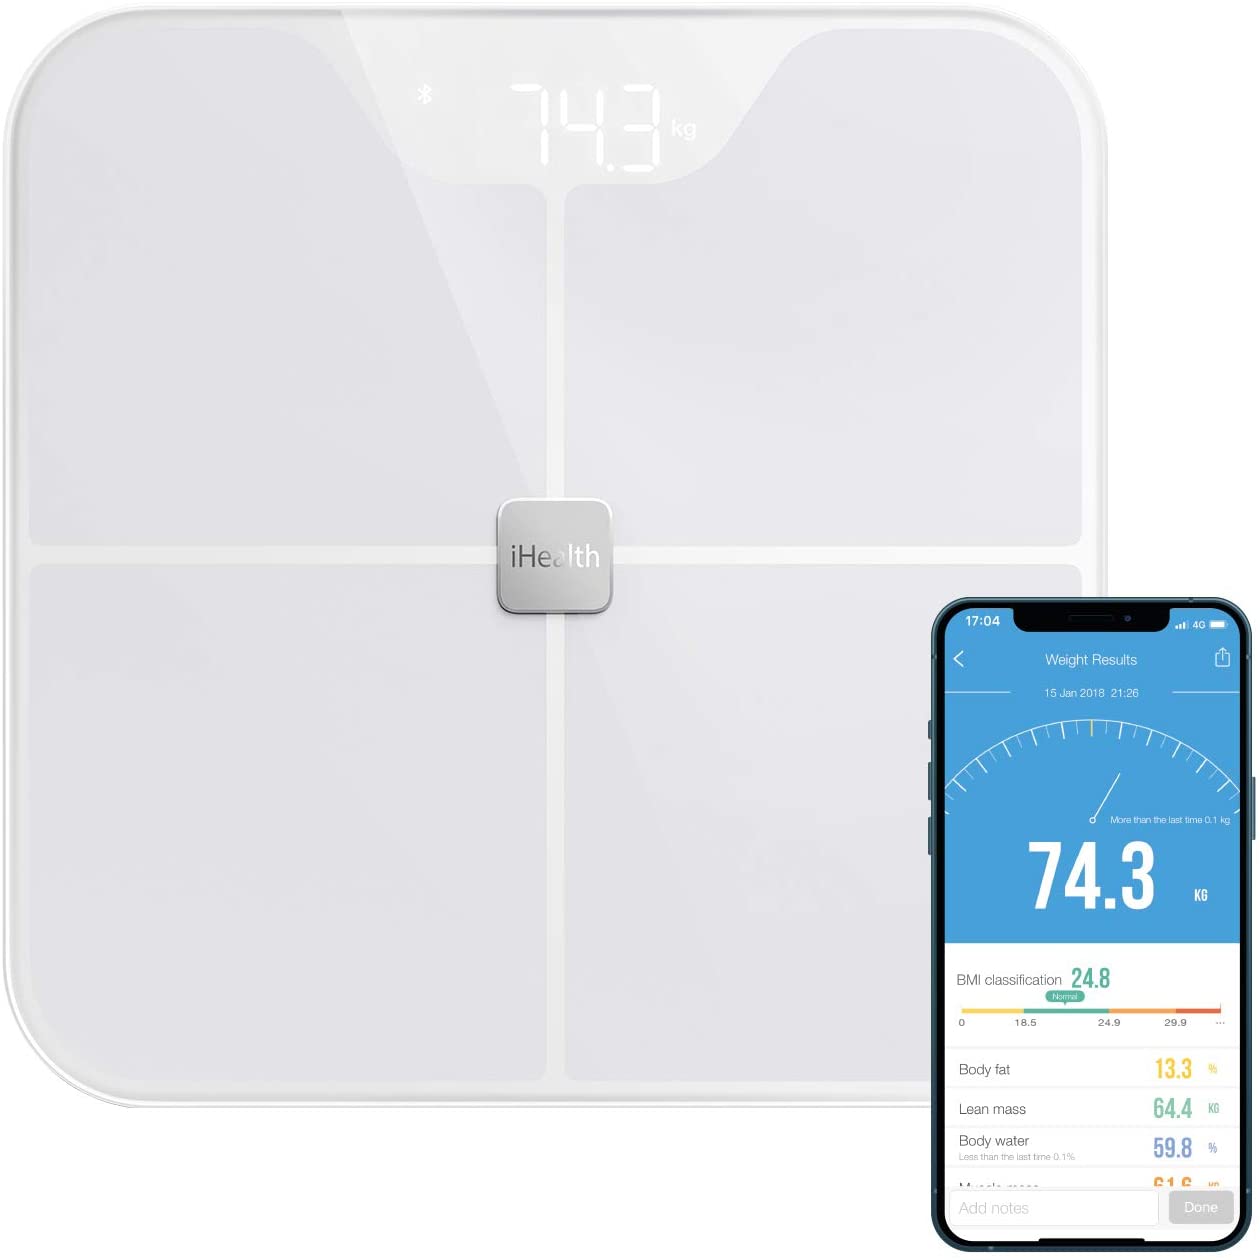 can fitbit scale work with apple watch